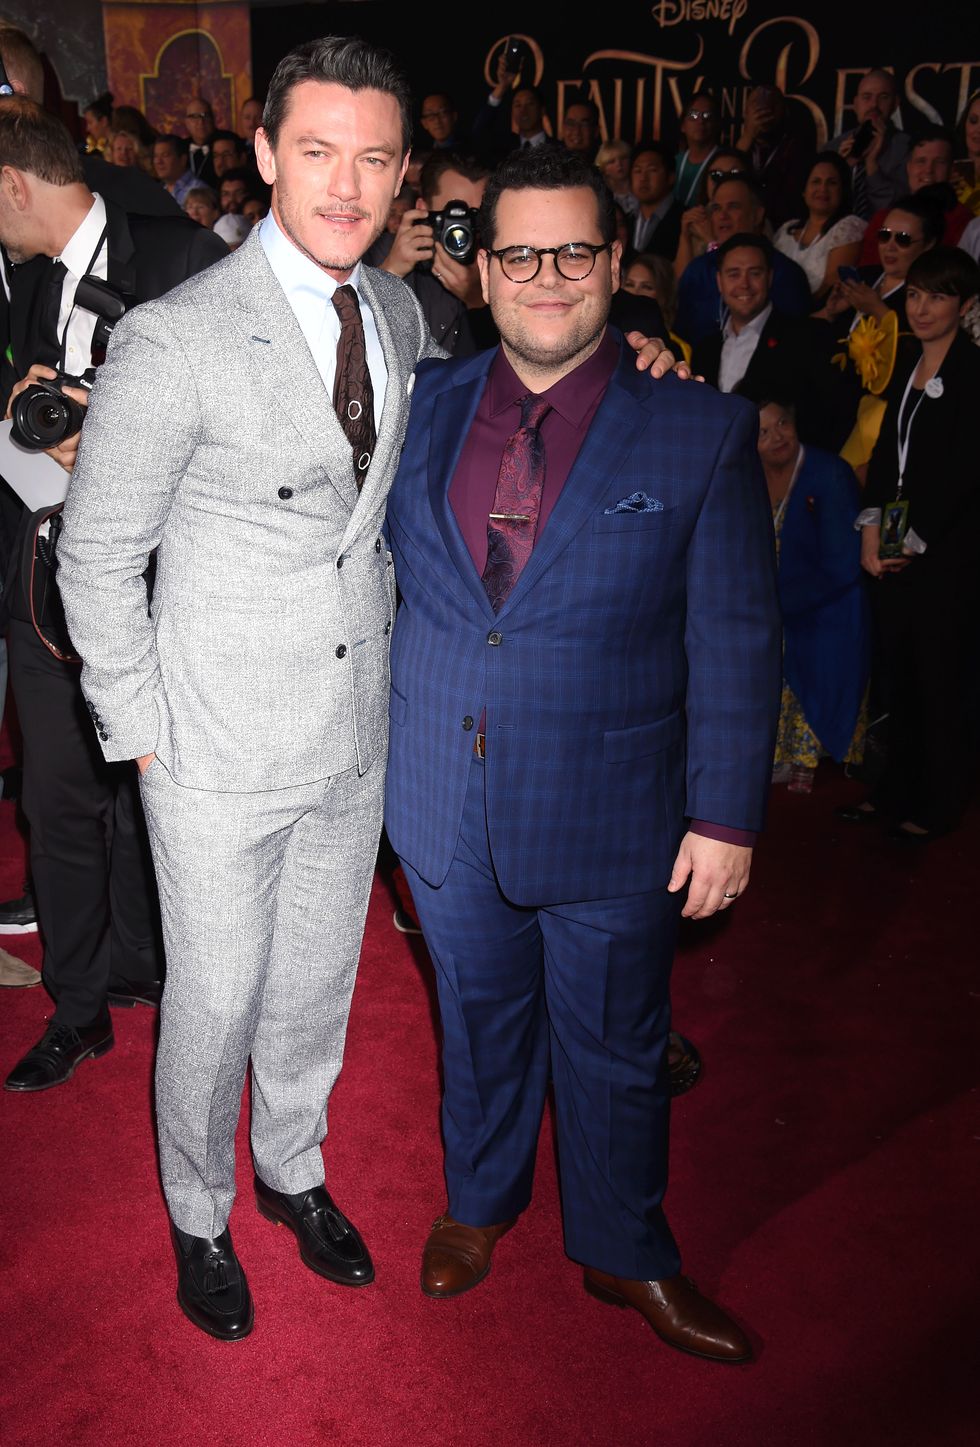 HOLLYWOOD, CA - MARCH 02: Actors Luke Evans (L) and Josh Gad arrive at the Premiere Of Disney's 'Beauty And The Beast' at the El Capitan Theatre on March 2, 2017 in Los Angeles, California. (Photo by Jeffrey Mayer/WireImage)